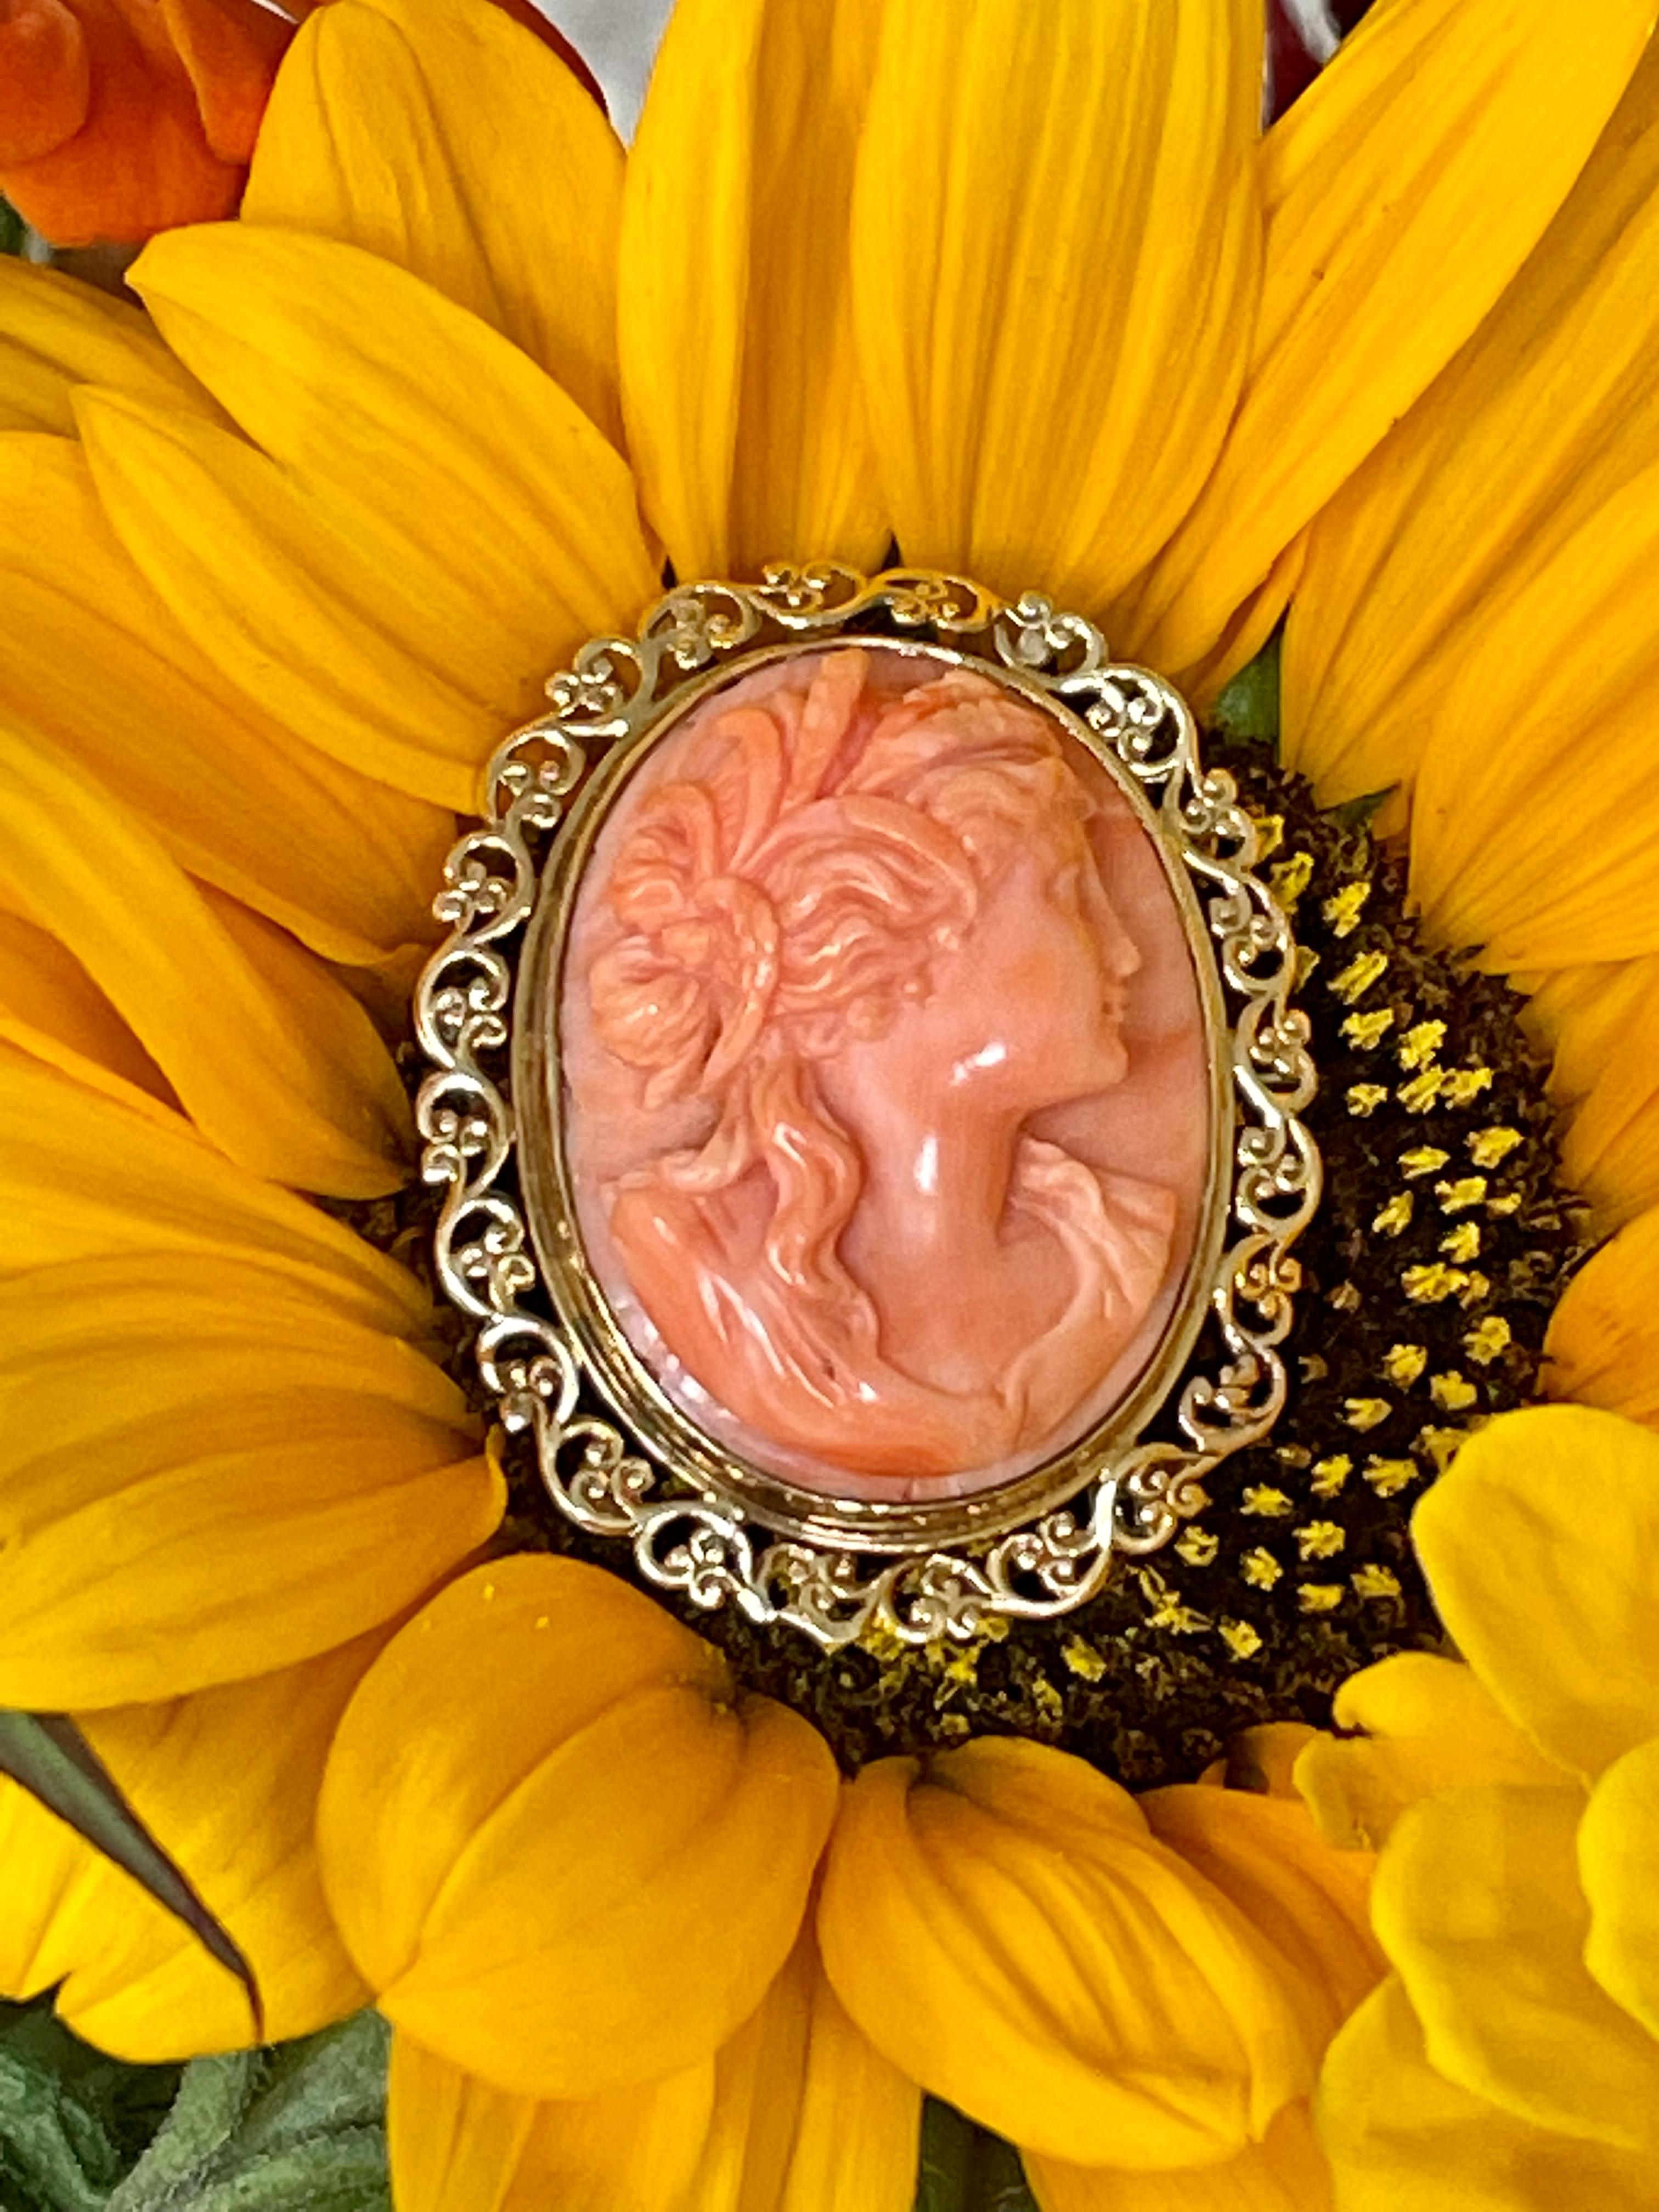 This lovely cameo brooch is a carving of a woman in Salmon Coral.  It is set in 14 karat yellow Gold.  

Weight:  15.1 grams
Measurement:  41 x 34mm

